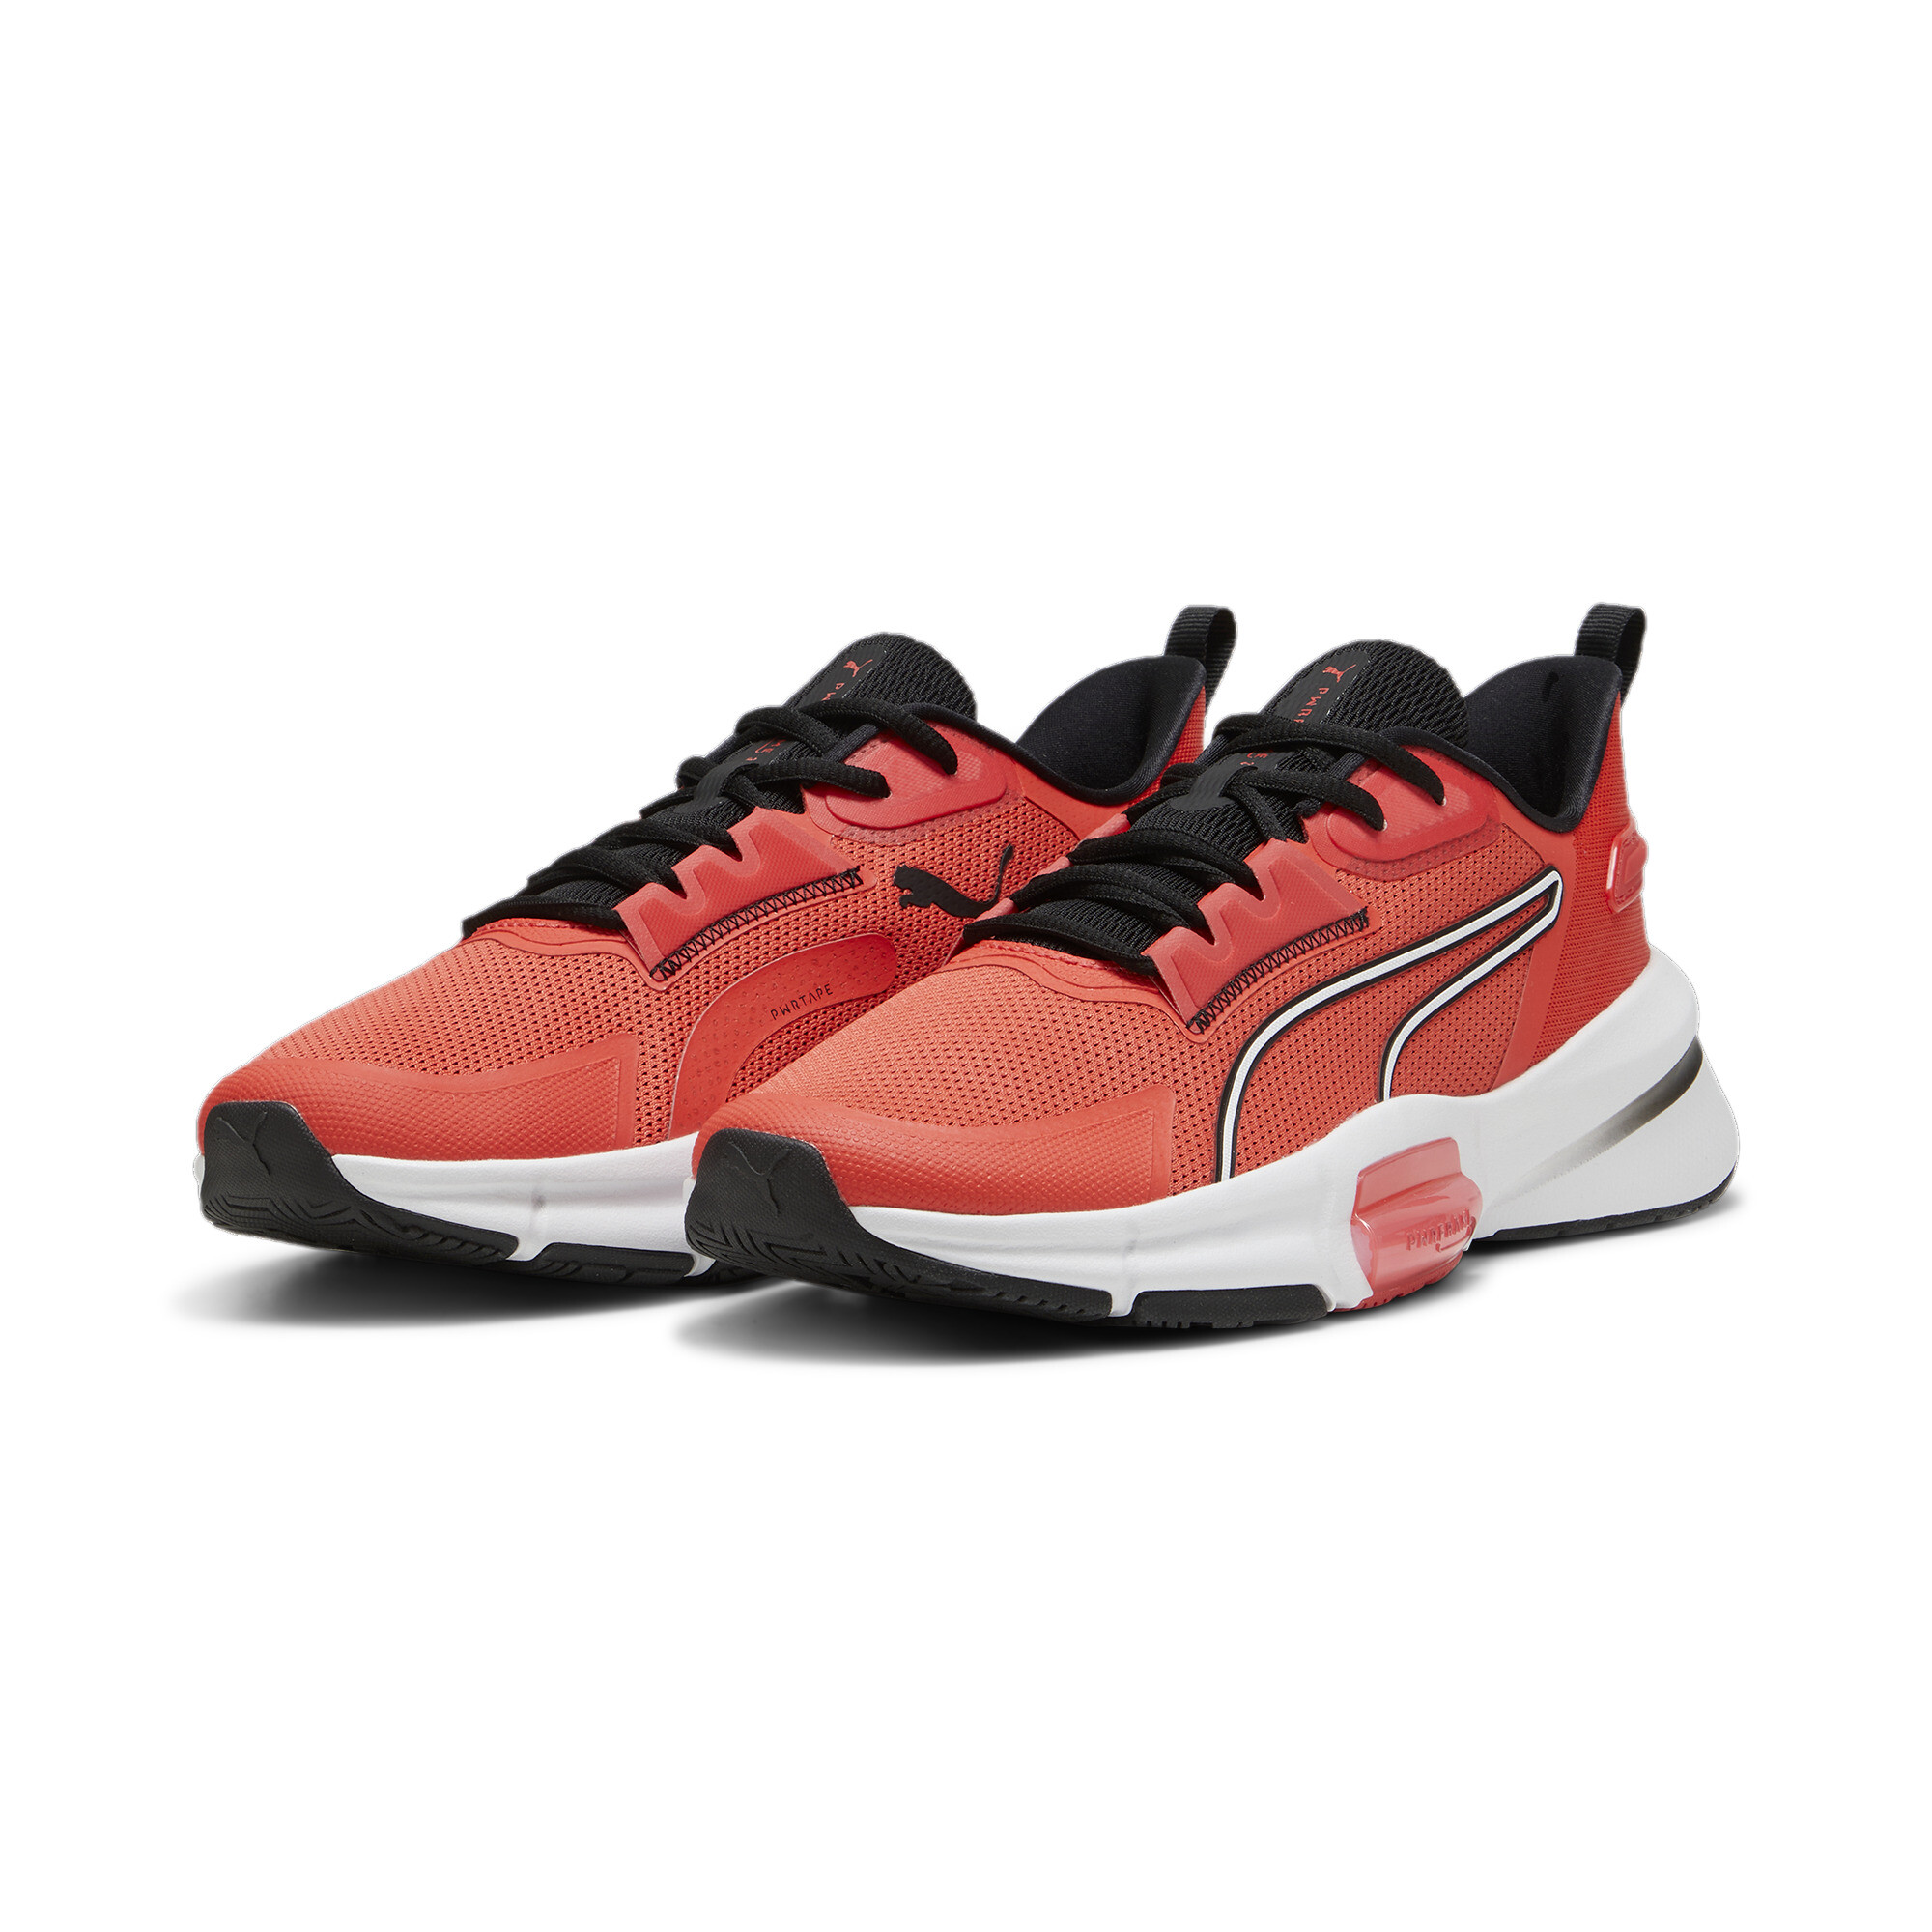 Men's PUMA PWRFrame TR 3 Training Shoes In Red, Size EU 44.5